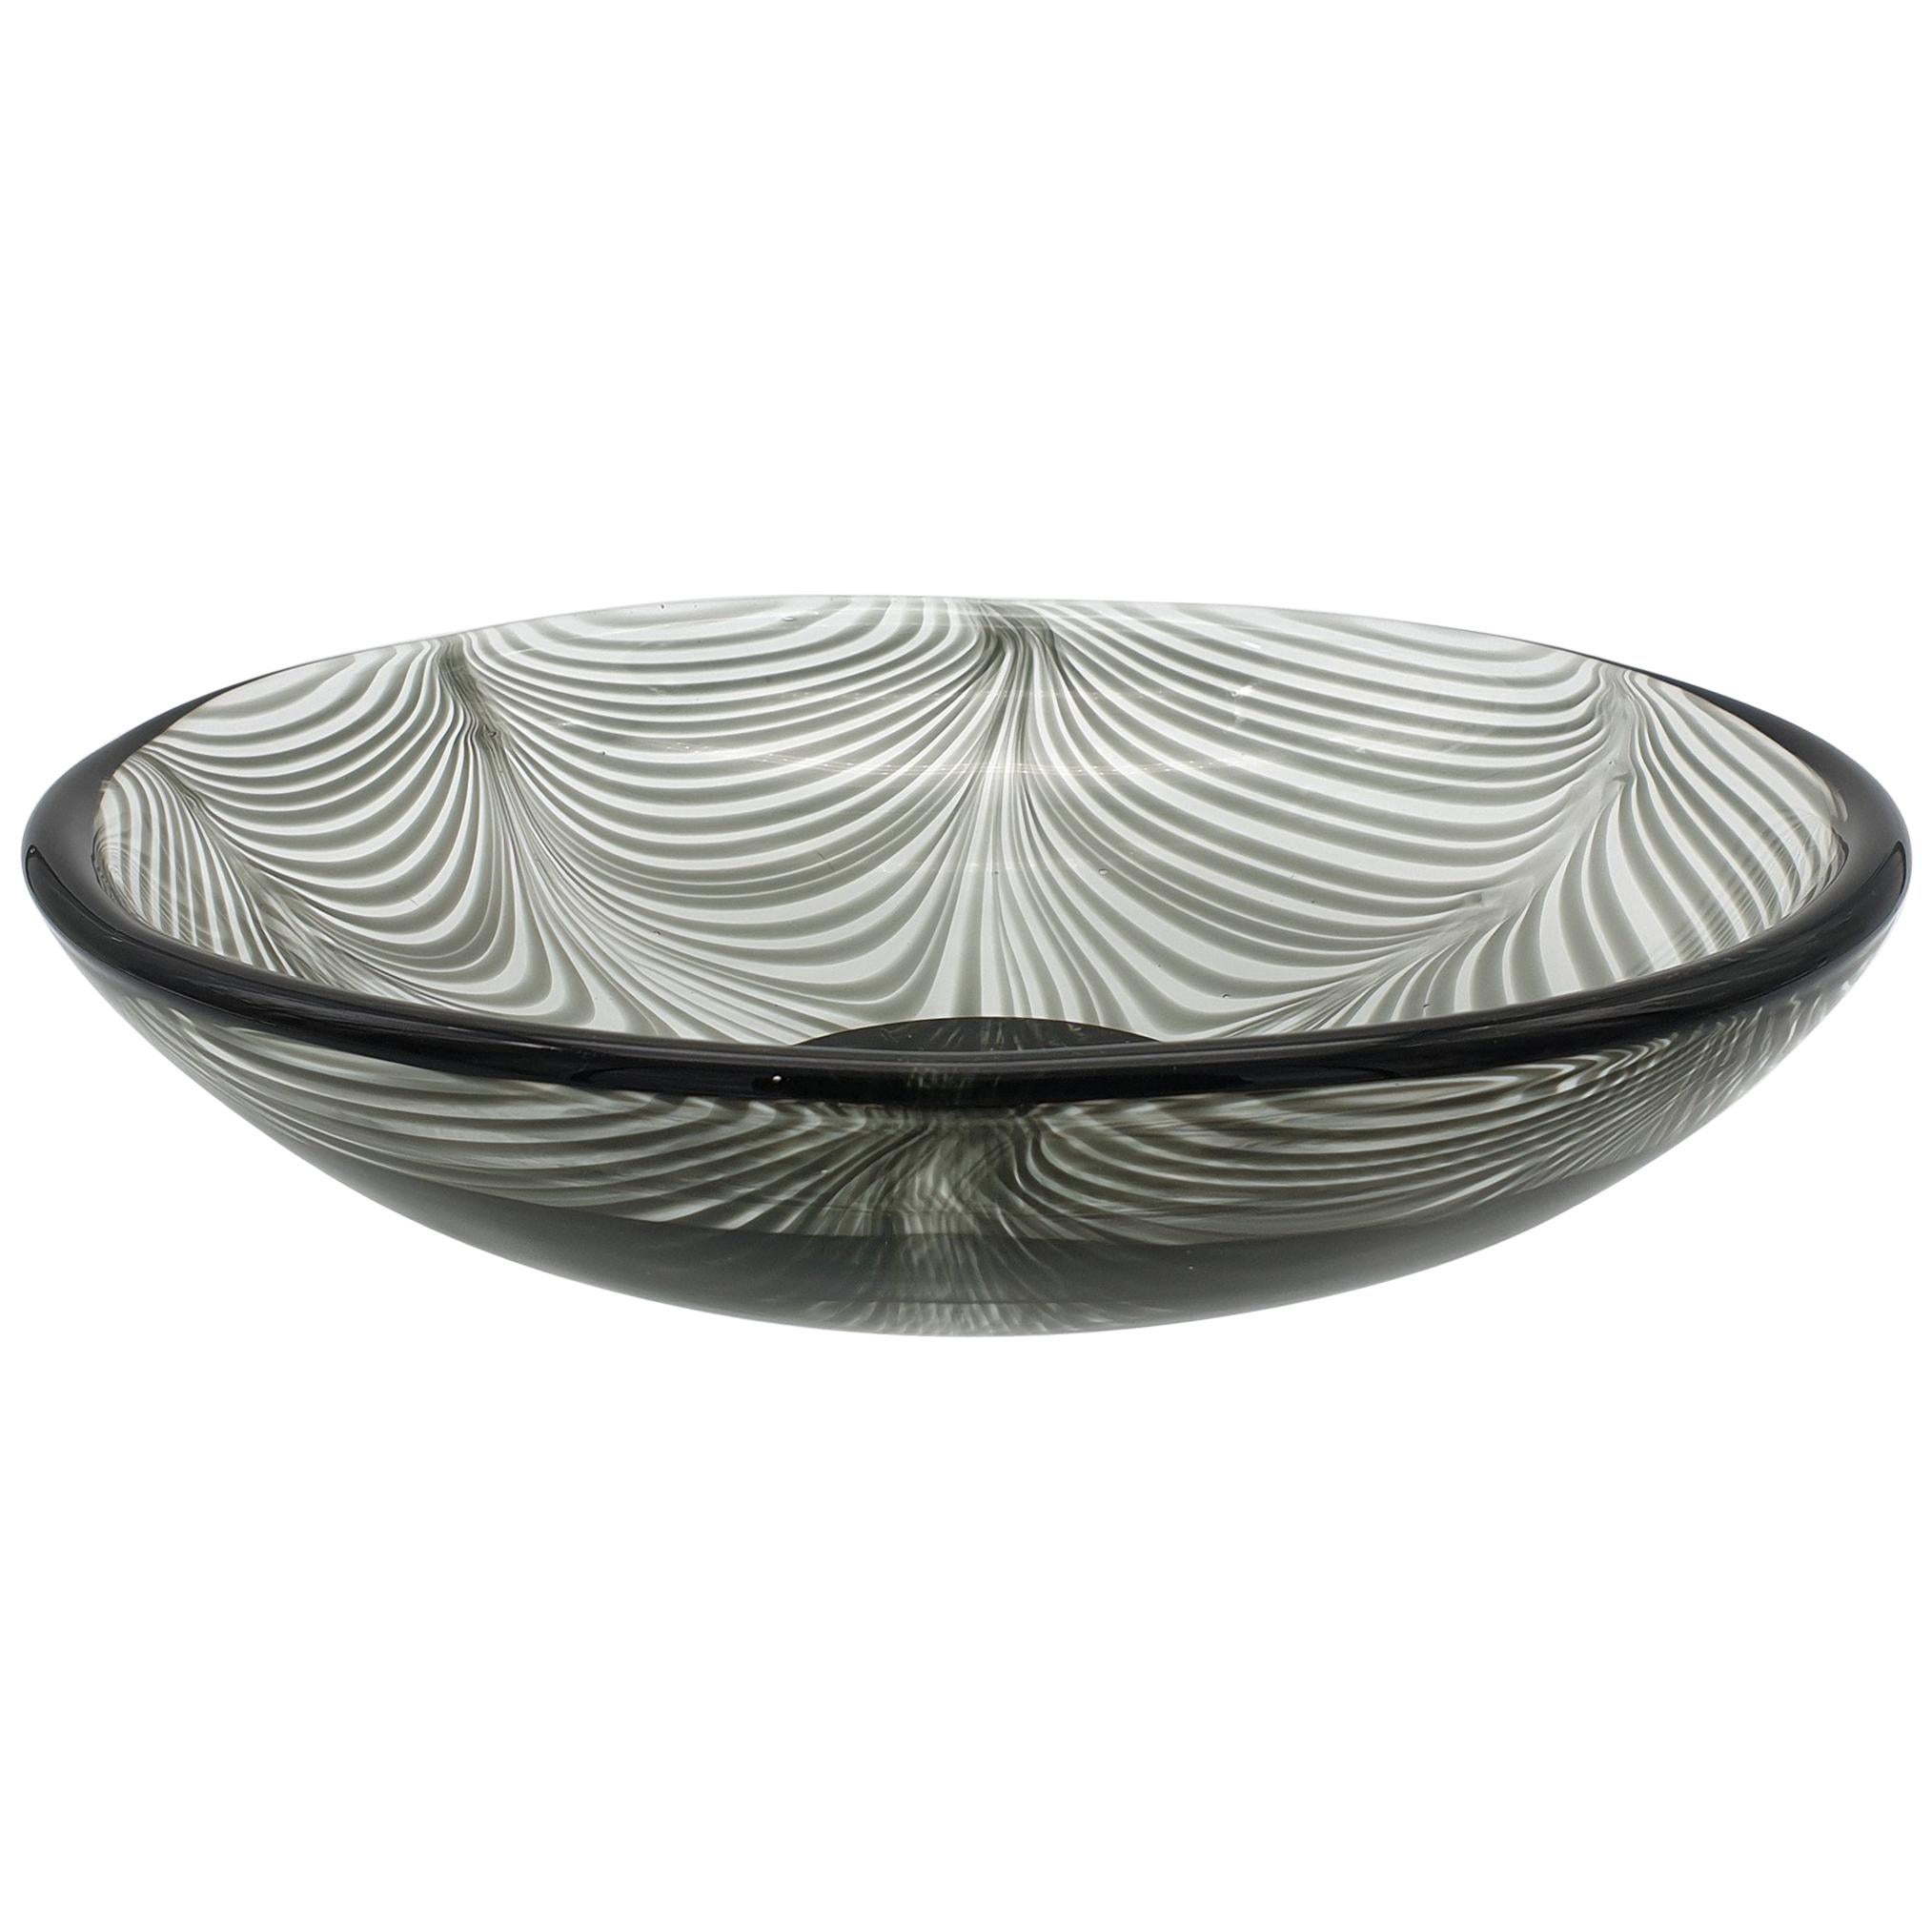 Murano Glass Bowl in "Fenicio" Festooning Pattern by Cenedese, 1970s For Sale